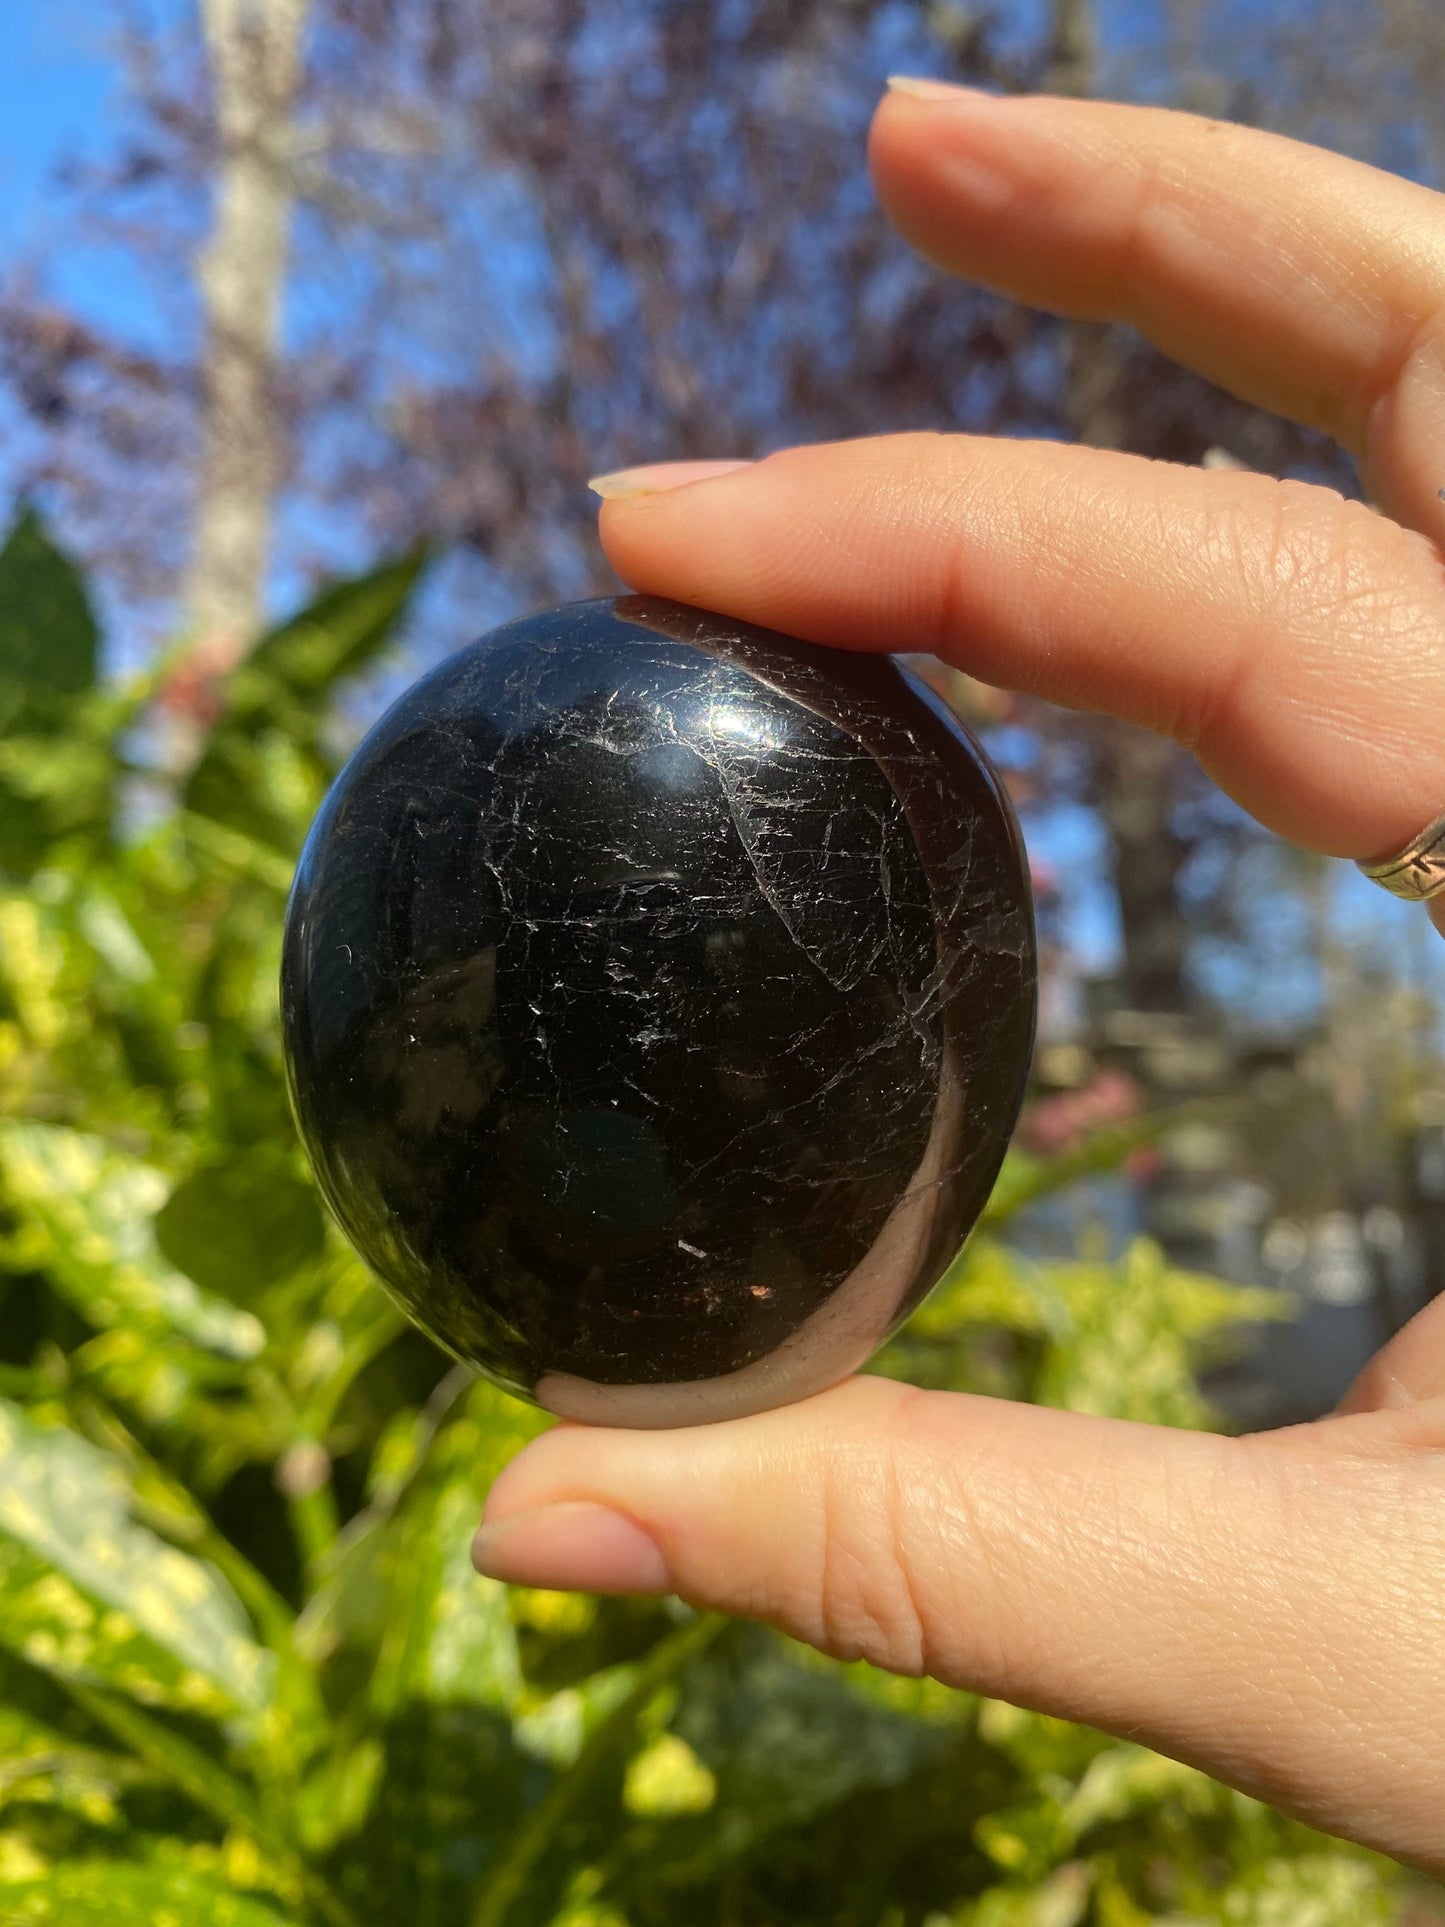 Polished Black Tourmaline Palm Stone natural Specimen / Supports Protection Security Setting Boundaries